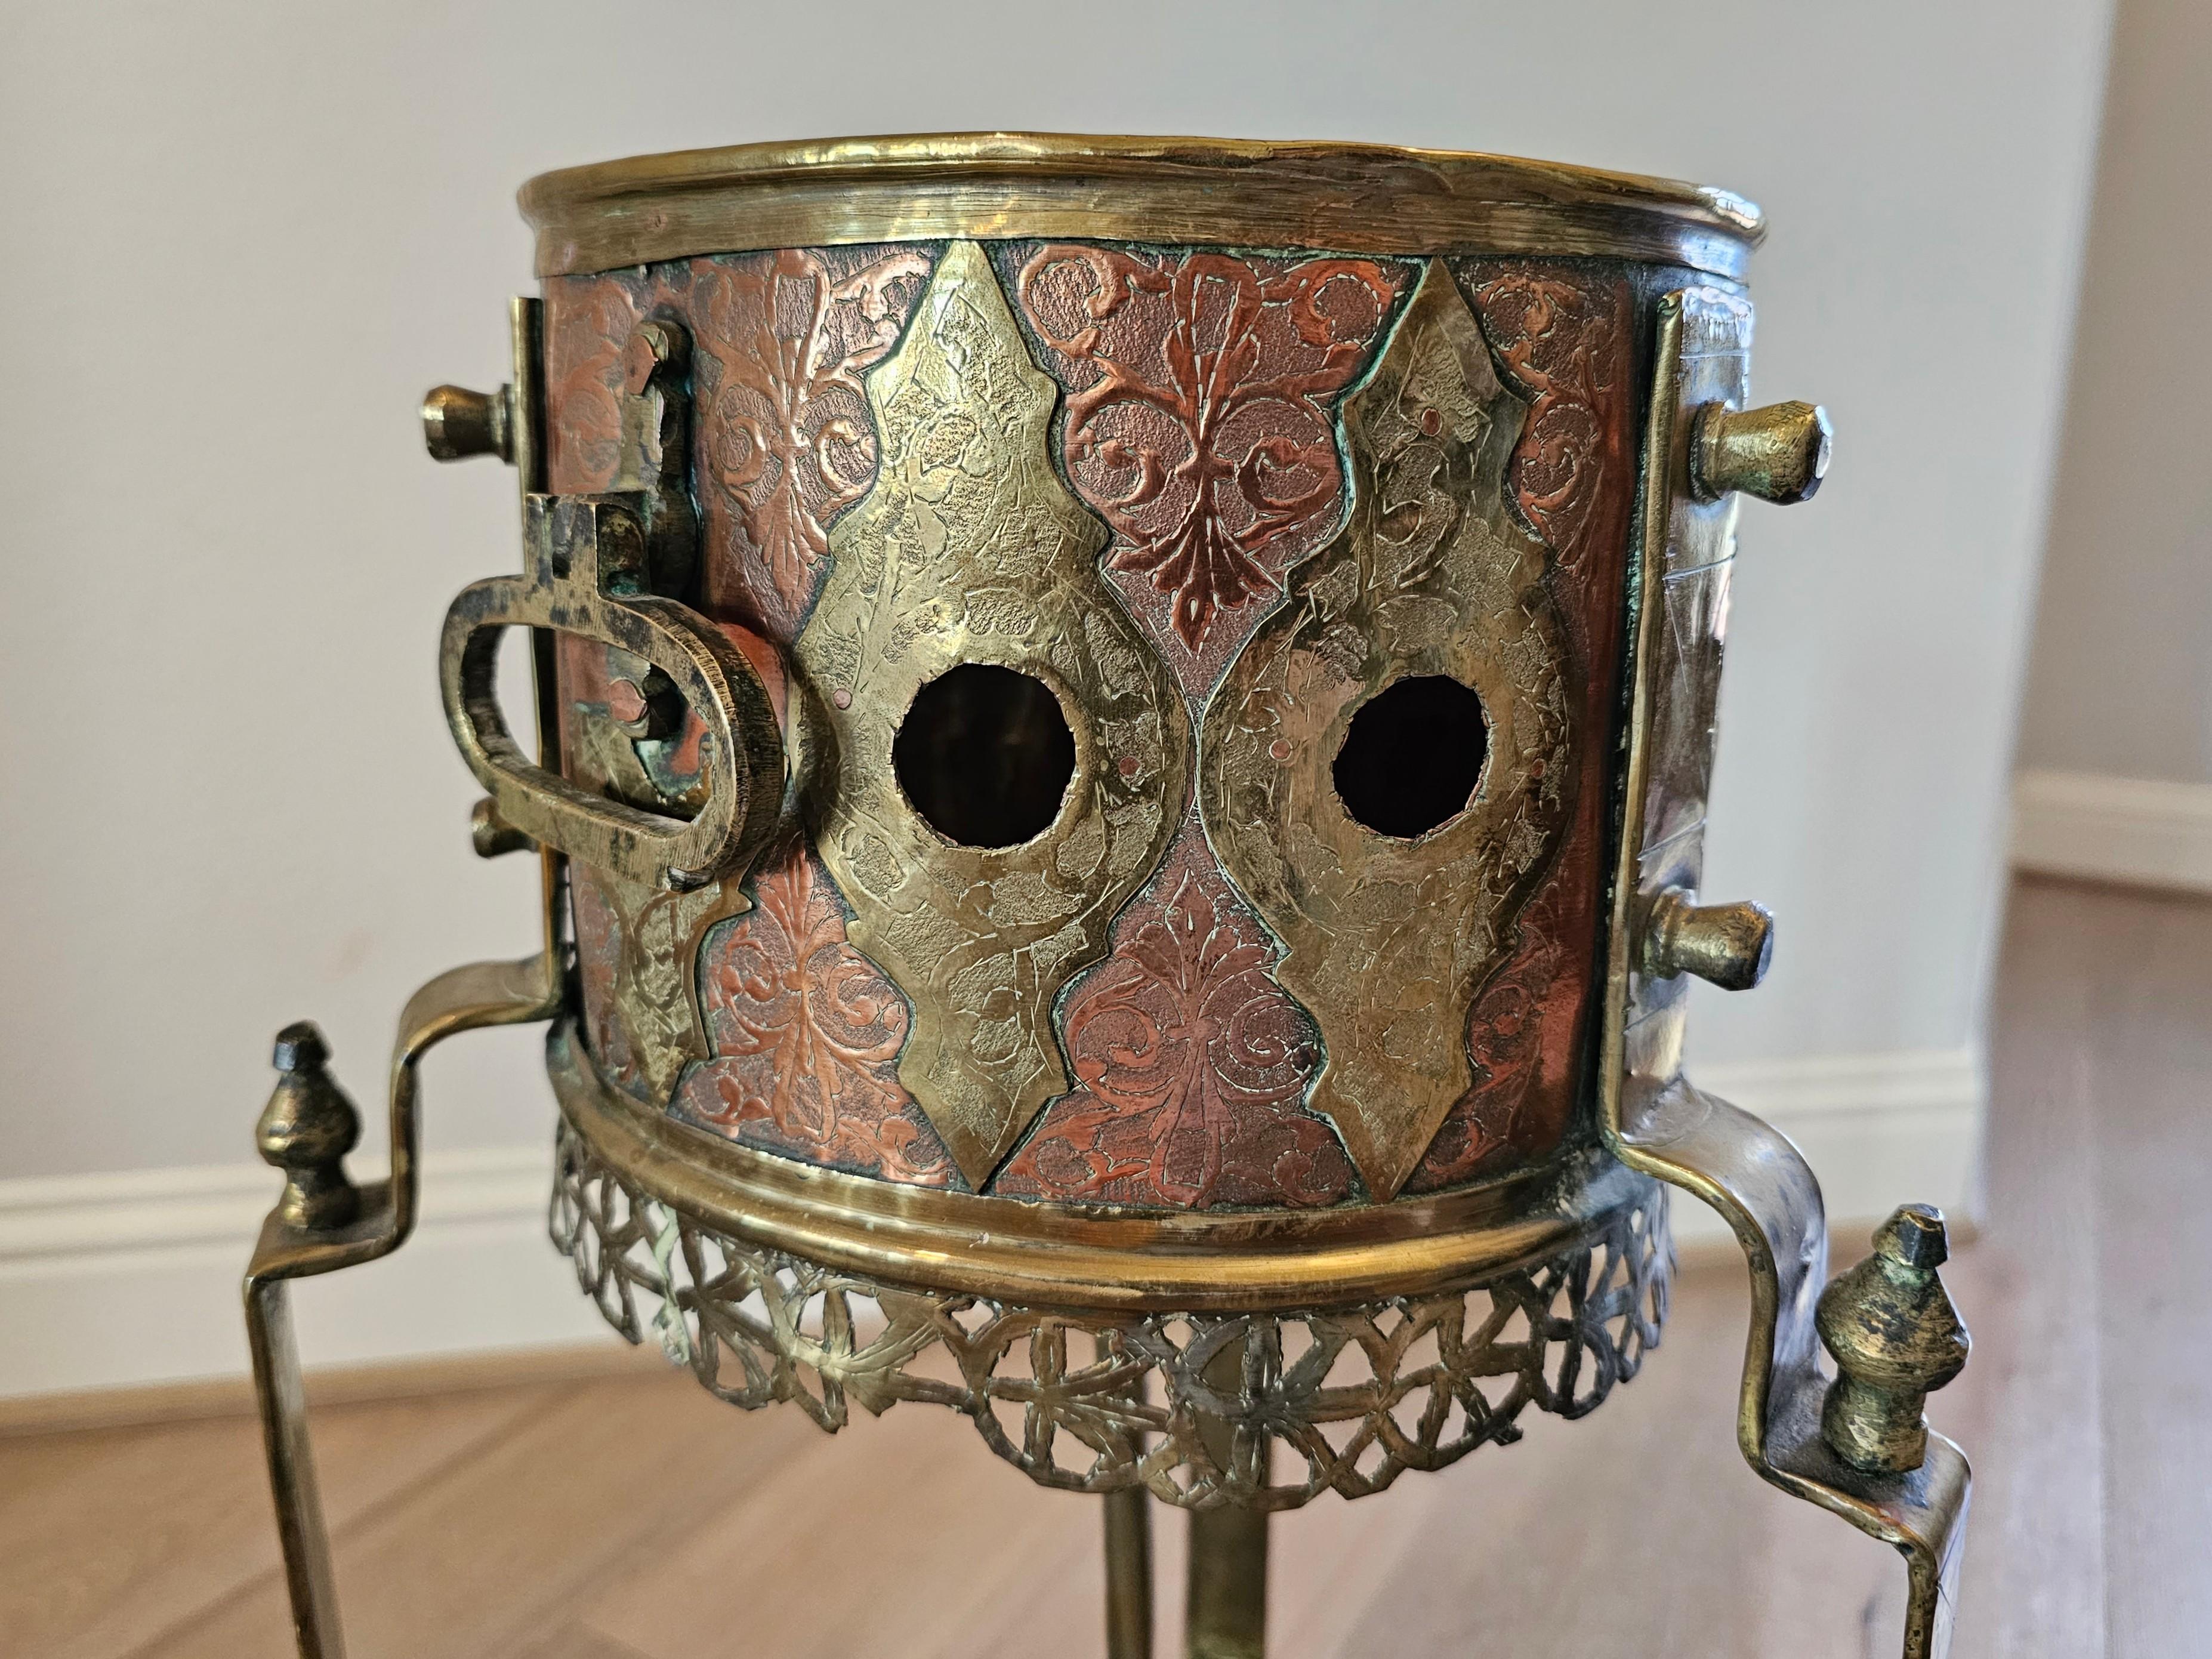 Metal Antique Moroccan Copper Brass Kettle Warmer Brazier Now Plant Stand For Sale